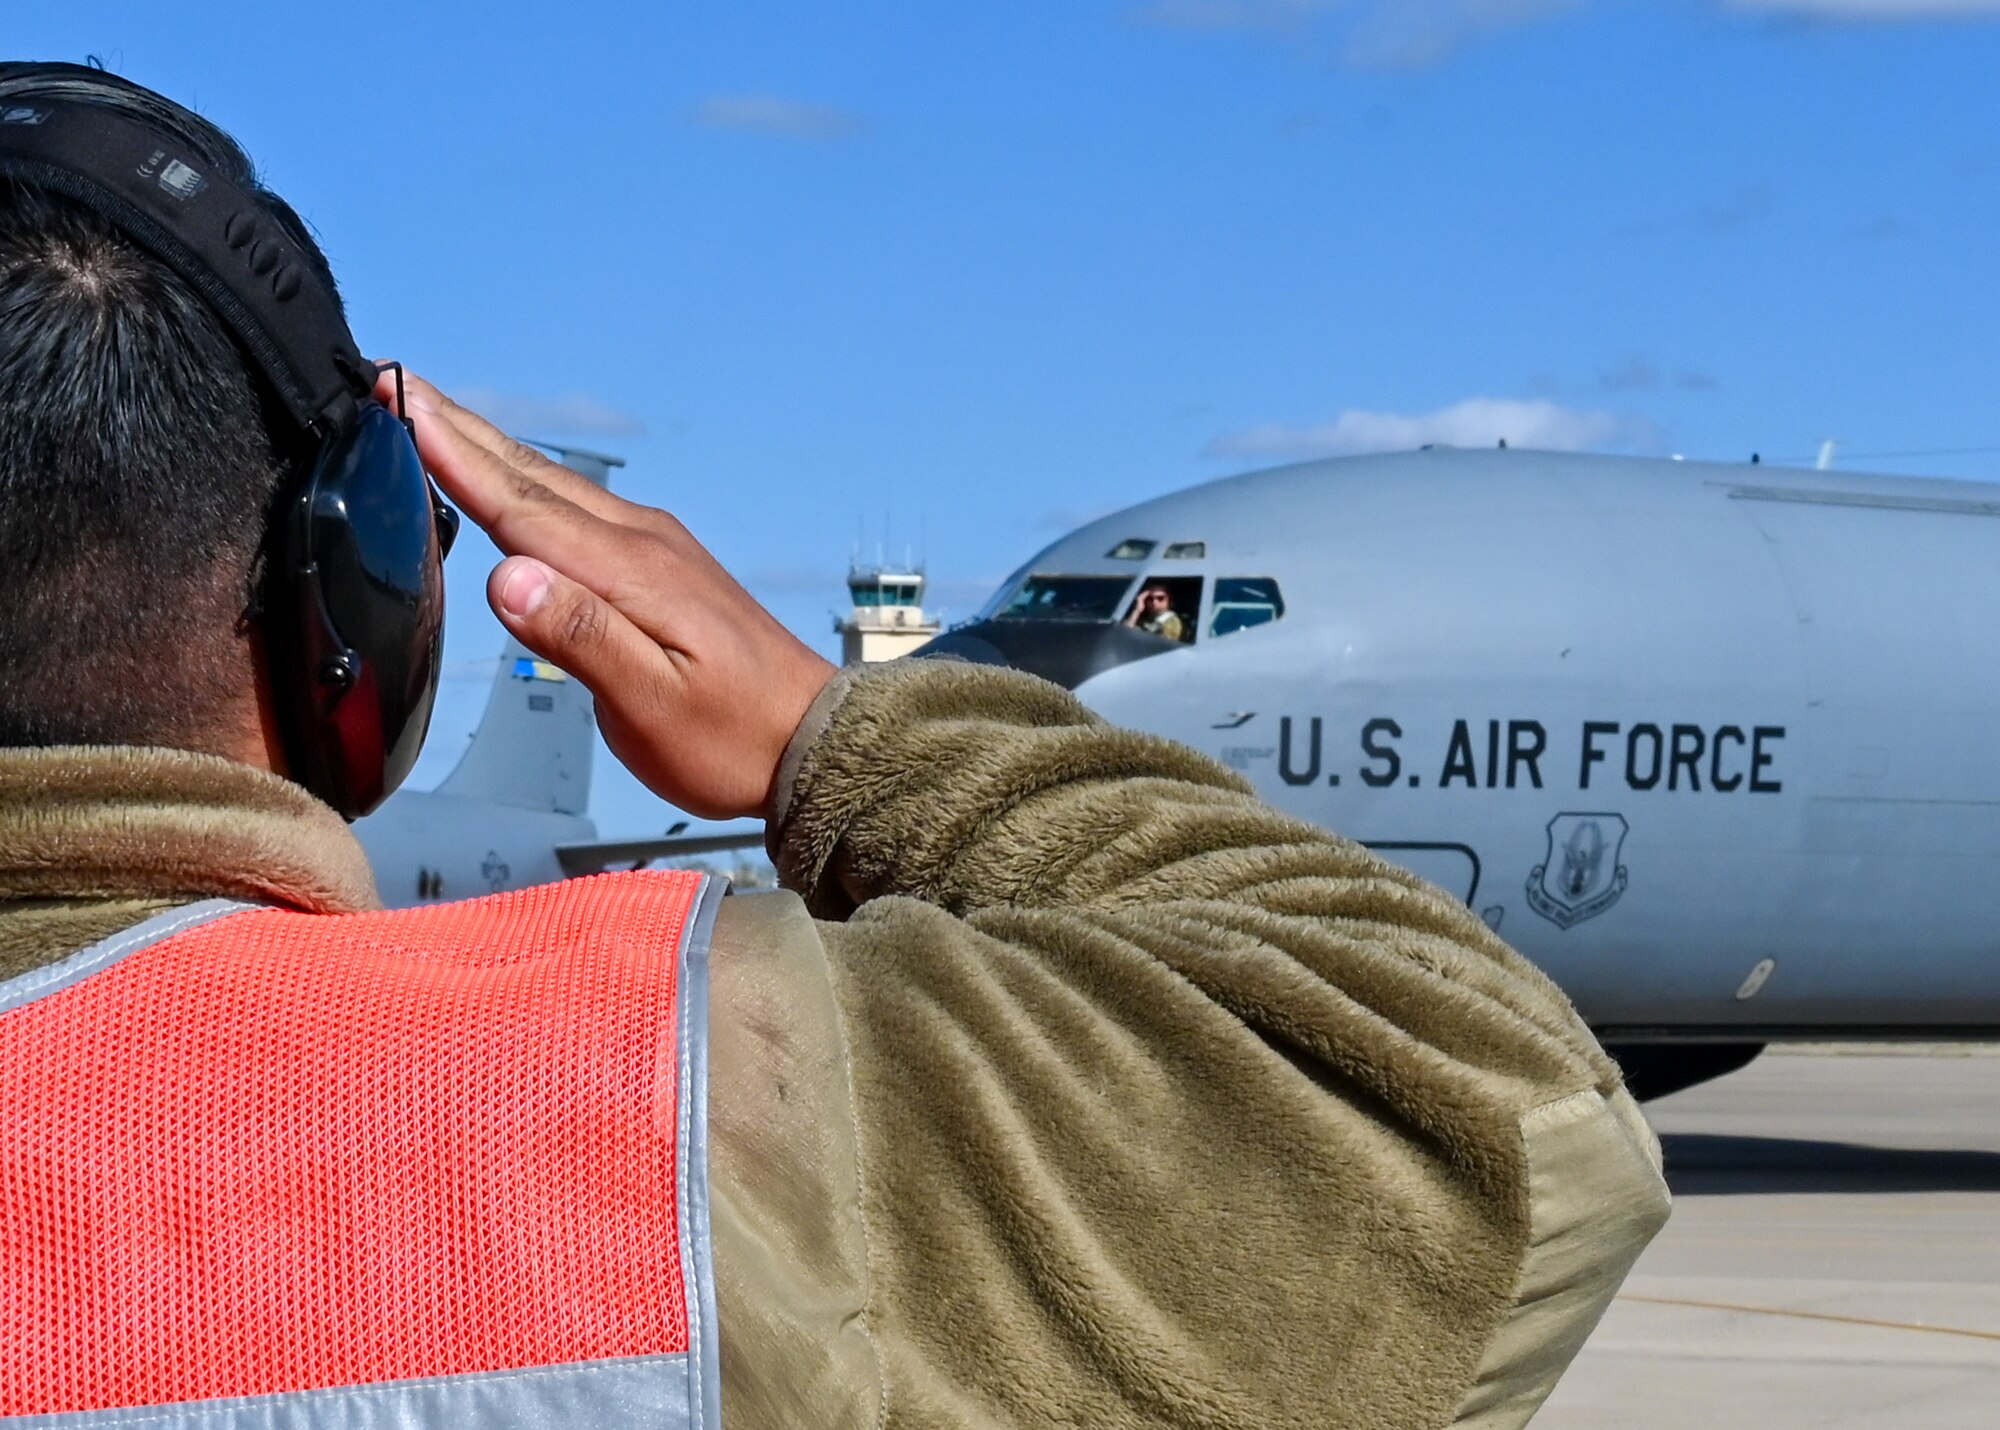 A crew chief from the 507th Aircraft Maintenance Squadron marshals a KC-135R Stratotanker April 7, 2021, at Tinker Air Force Base, Oklahoma. (U.S. Air Force photo by Senior Airman Mary Begy)